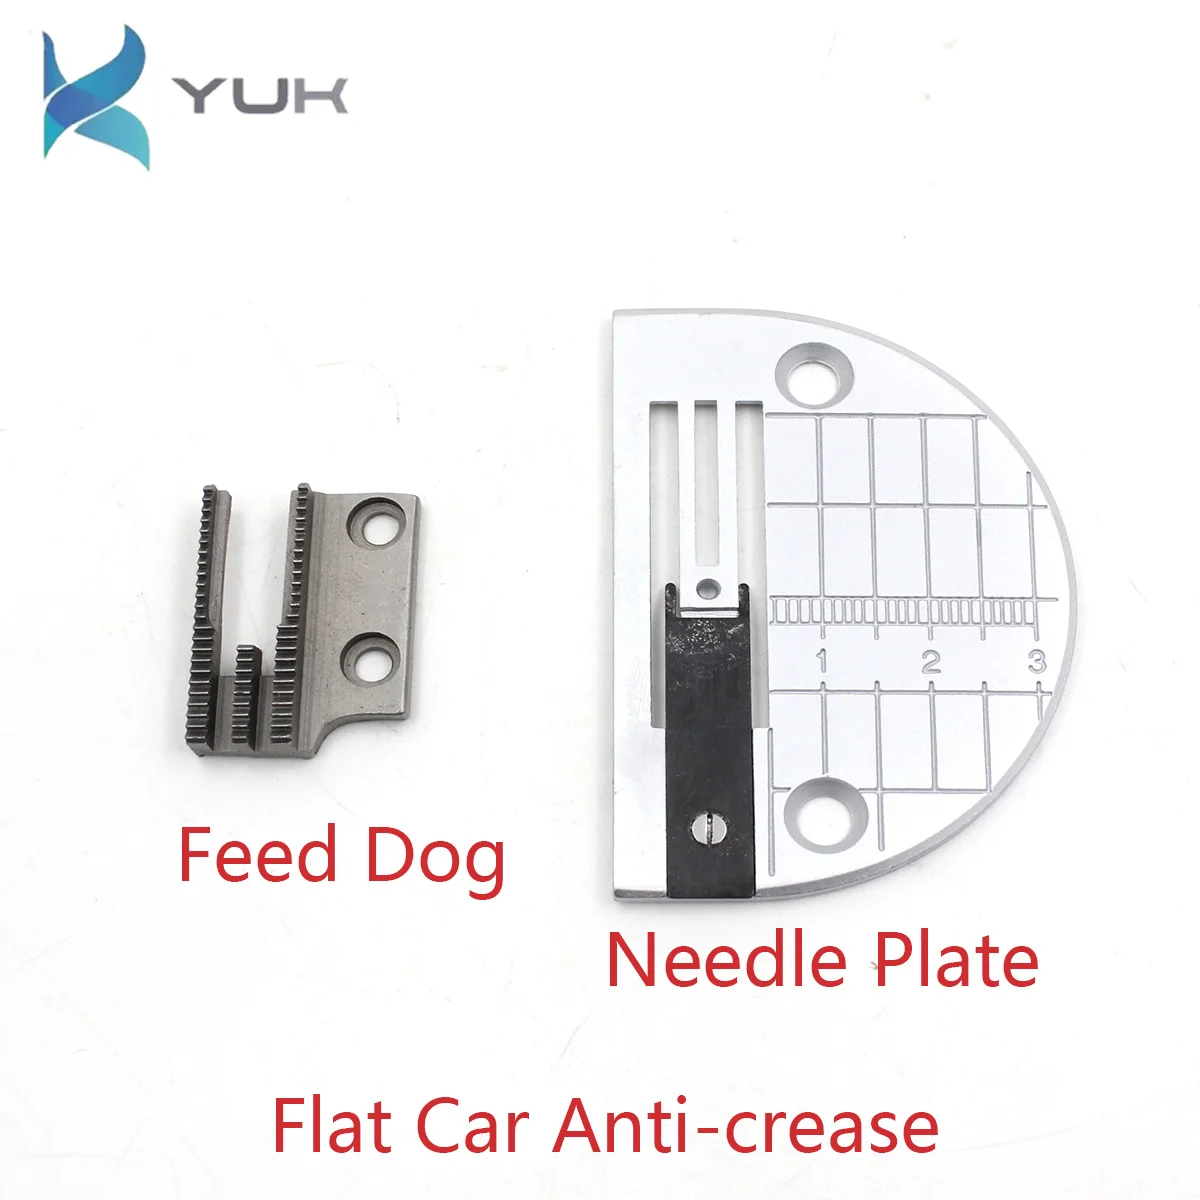 Sewing Machine Anti-crease Needle Plate & Feed Dog For Flat Car Juki Ddl-555 8700 8500 227 Brother .ETC